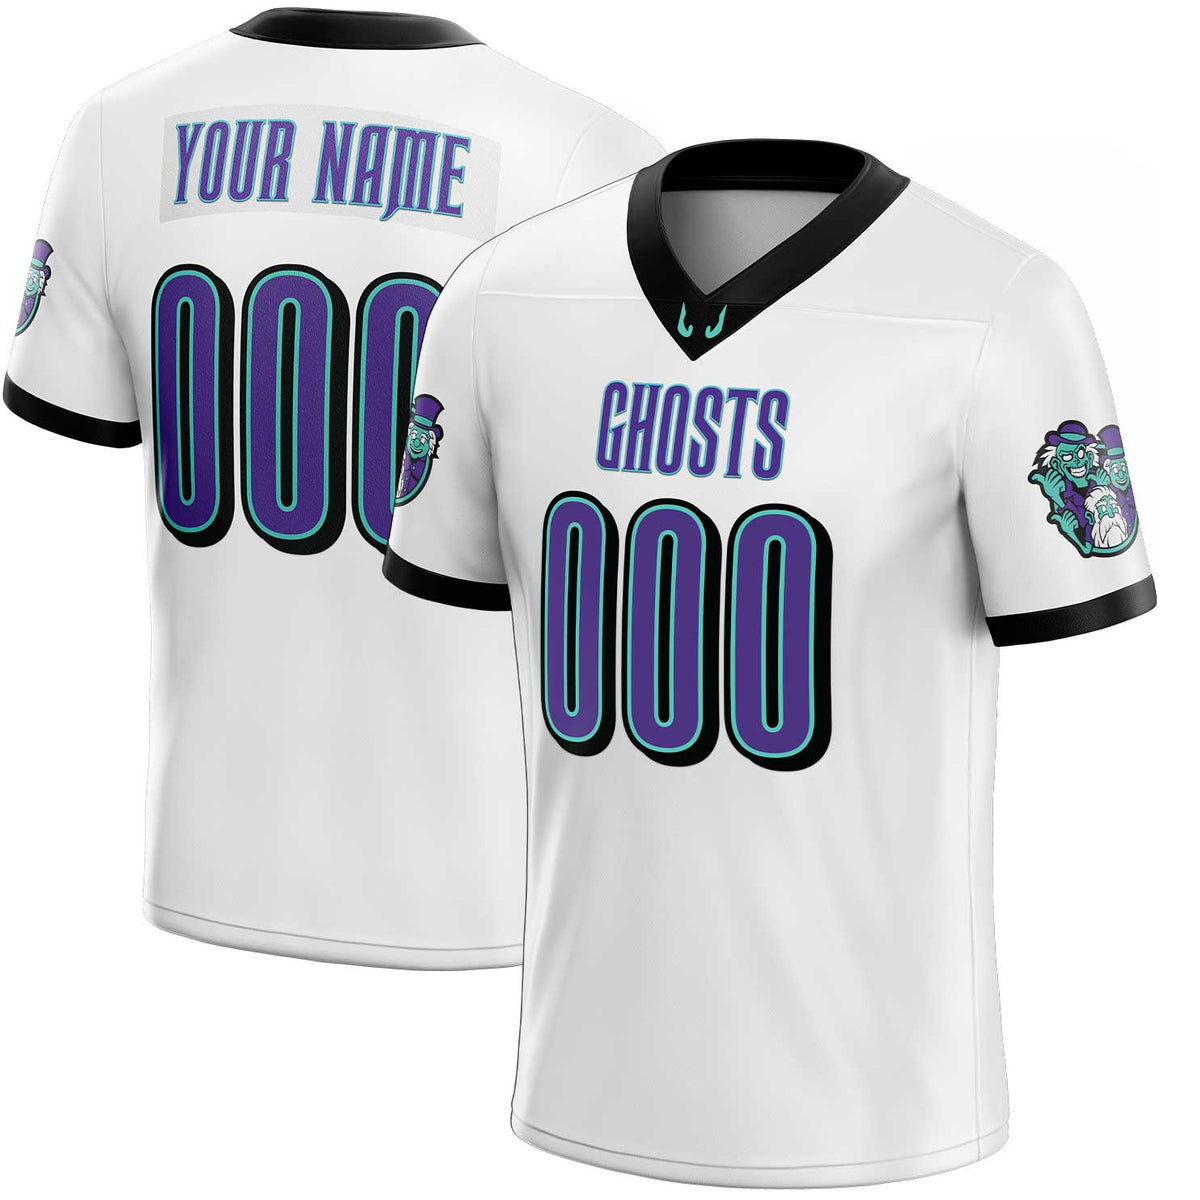 Ghosts Football Jersey